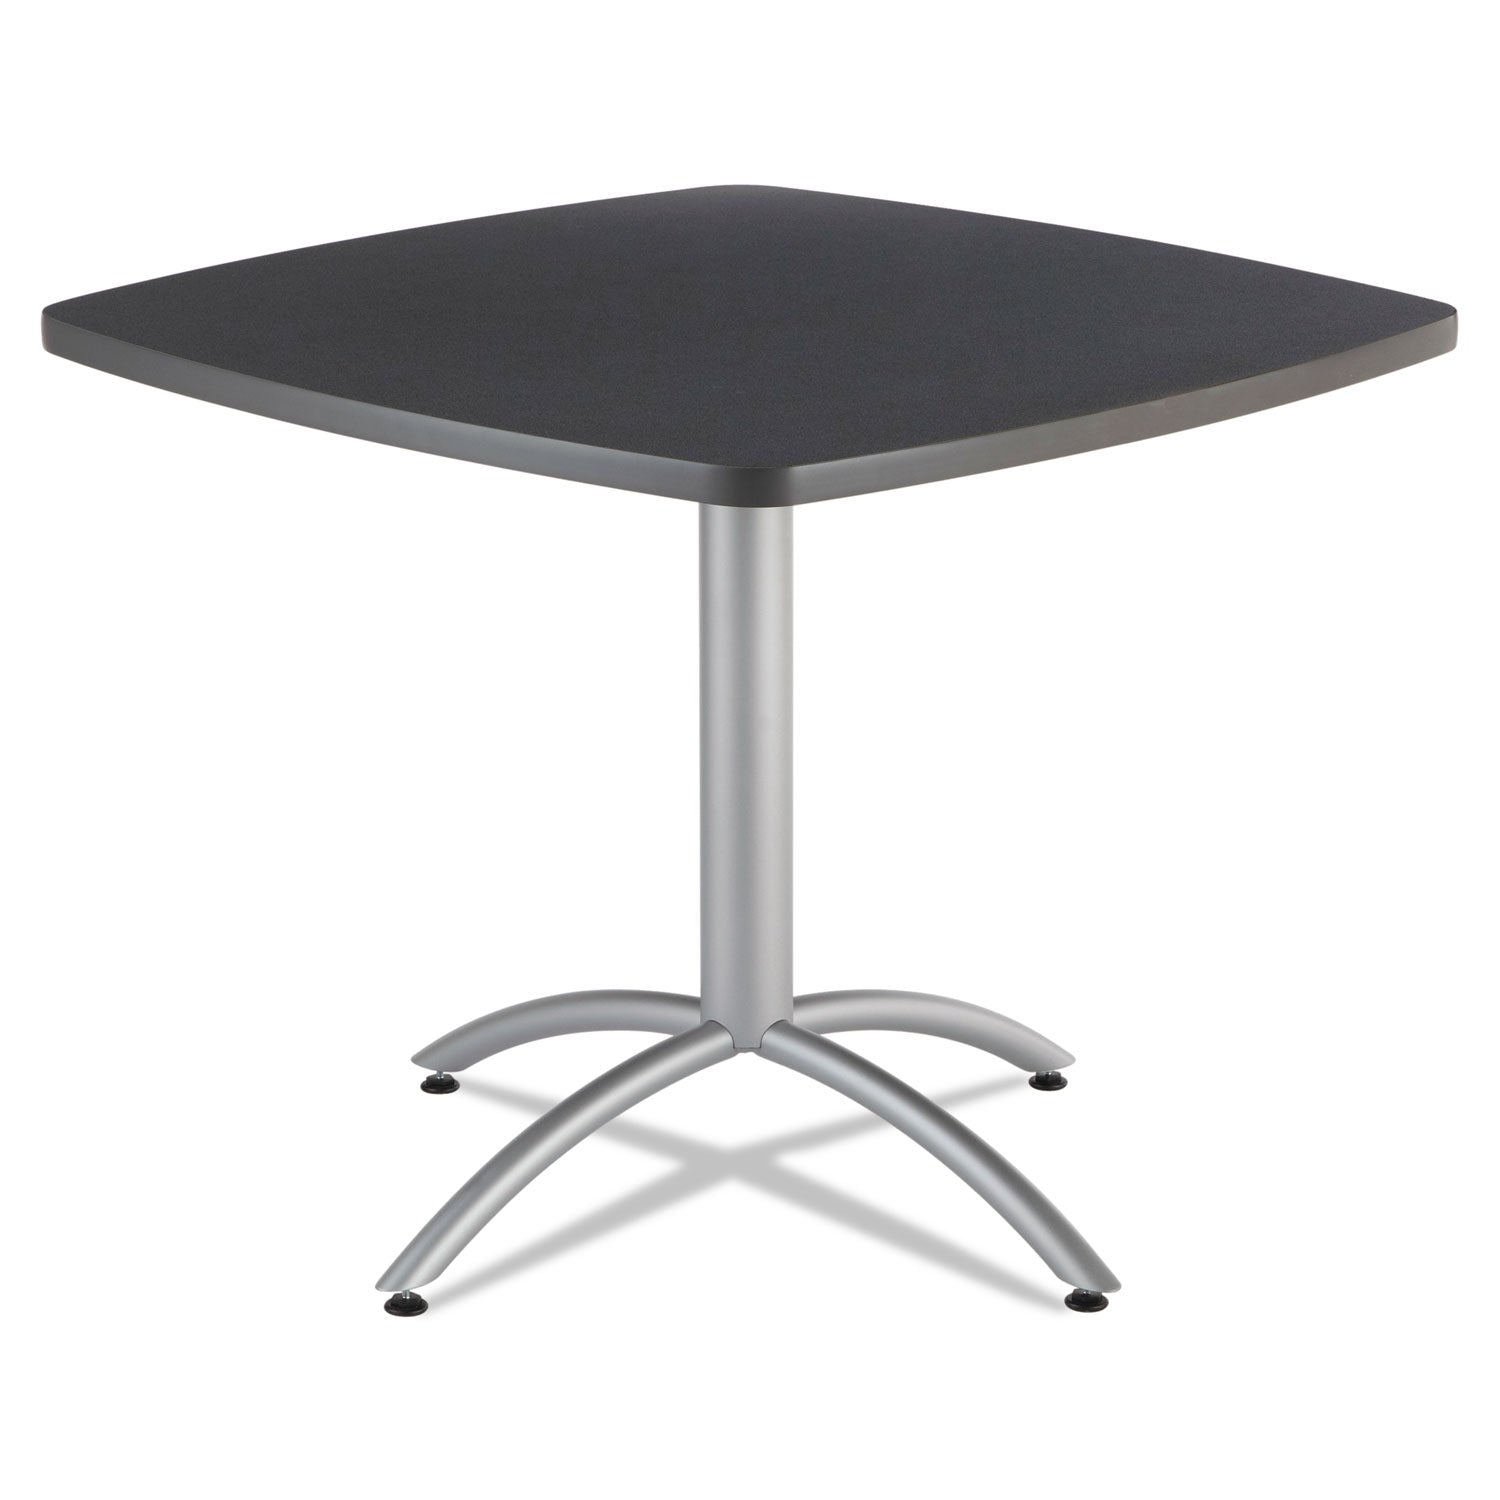 CafeWorks Cafe-Height Table, Square, 36" x 36" x 30", Graphite Granite/Silver - 1